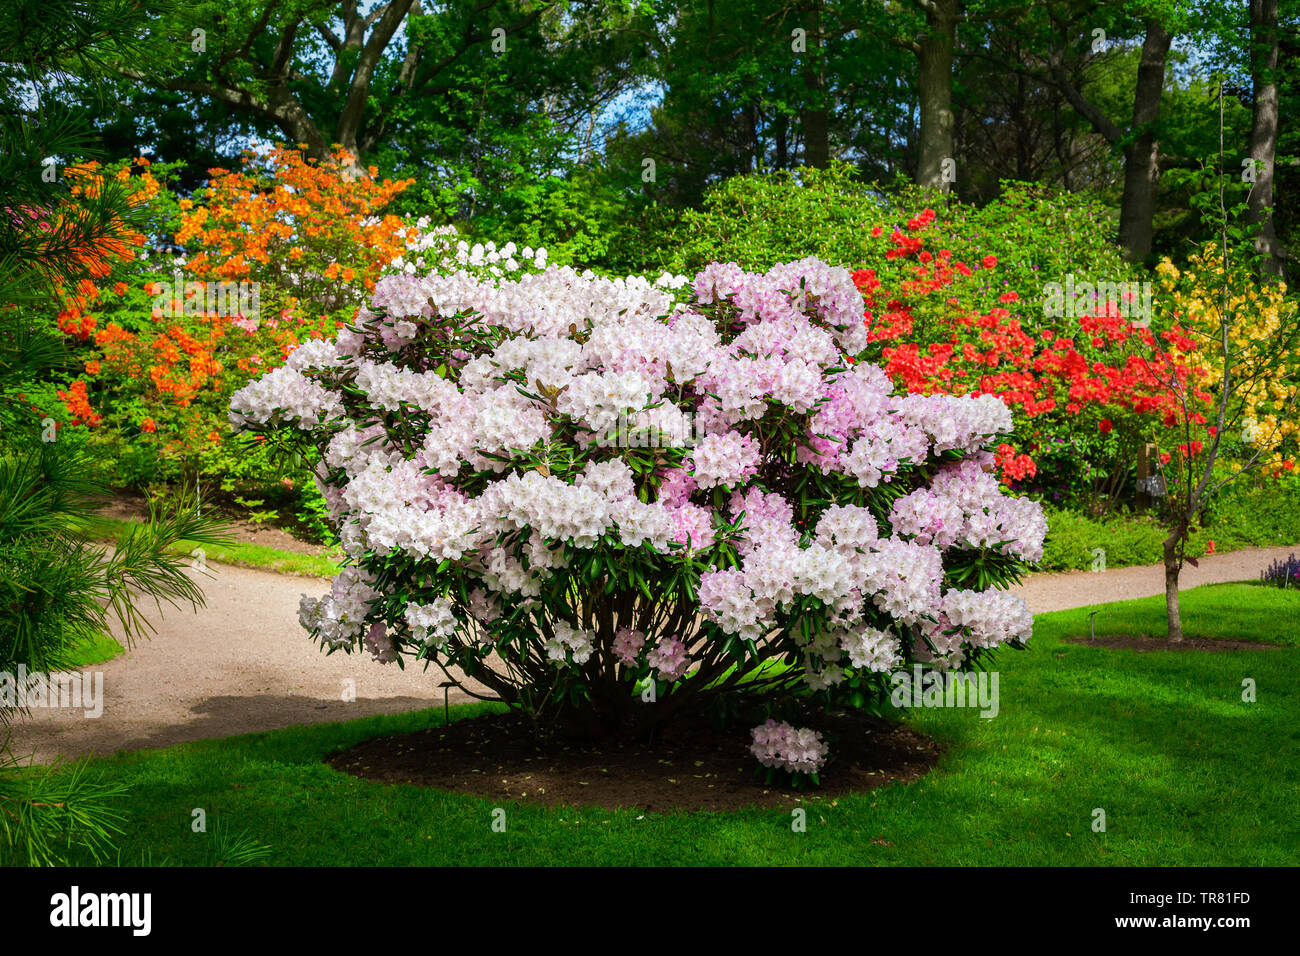 Azaleas and rhododendrons flowering in the spring garden. Stock Photo